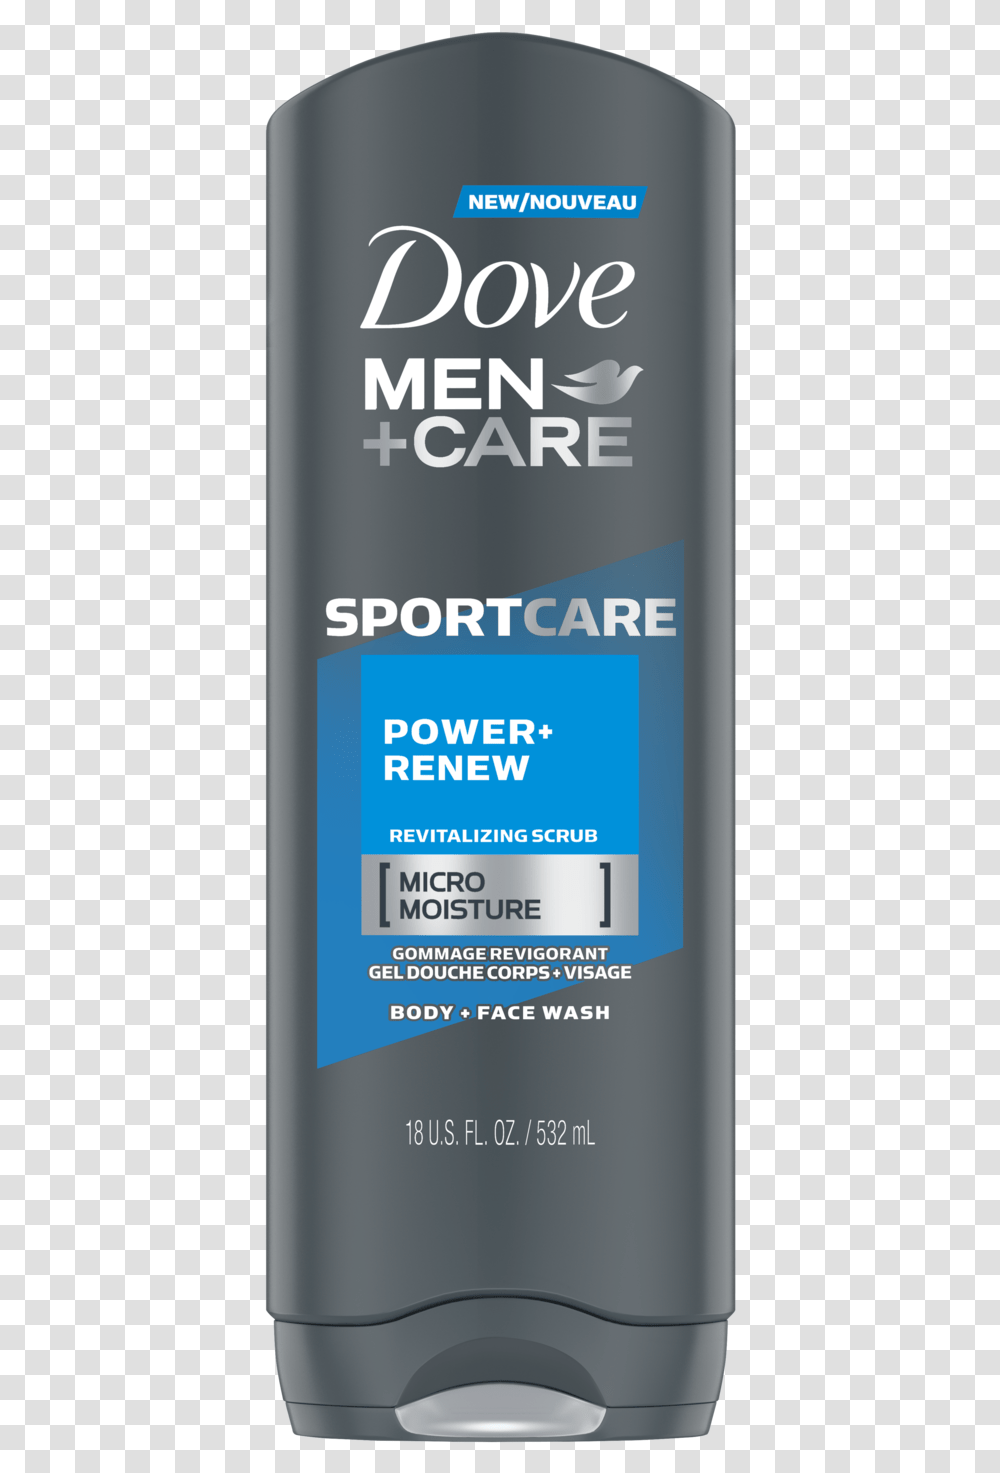 Dove Men Care Sportcare Body Wash Power Renew 18 Oz Dove Men Sport Care Body Wash, Bottle, Cosmetics, Can, Tin Transparent Png